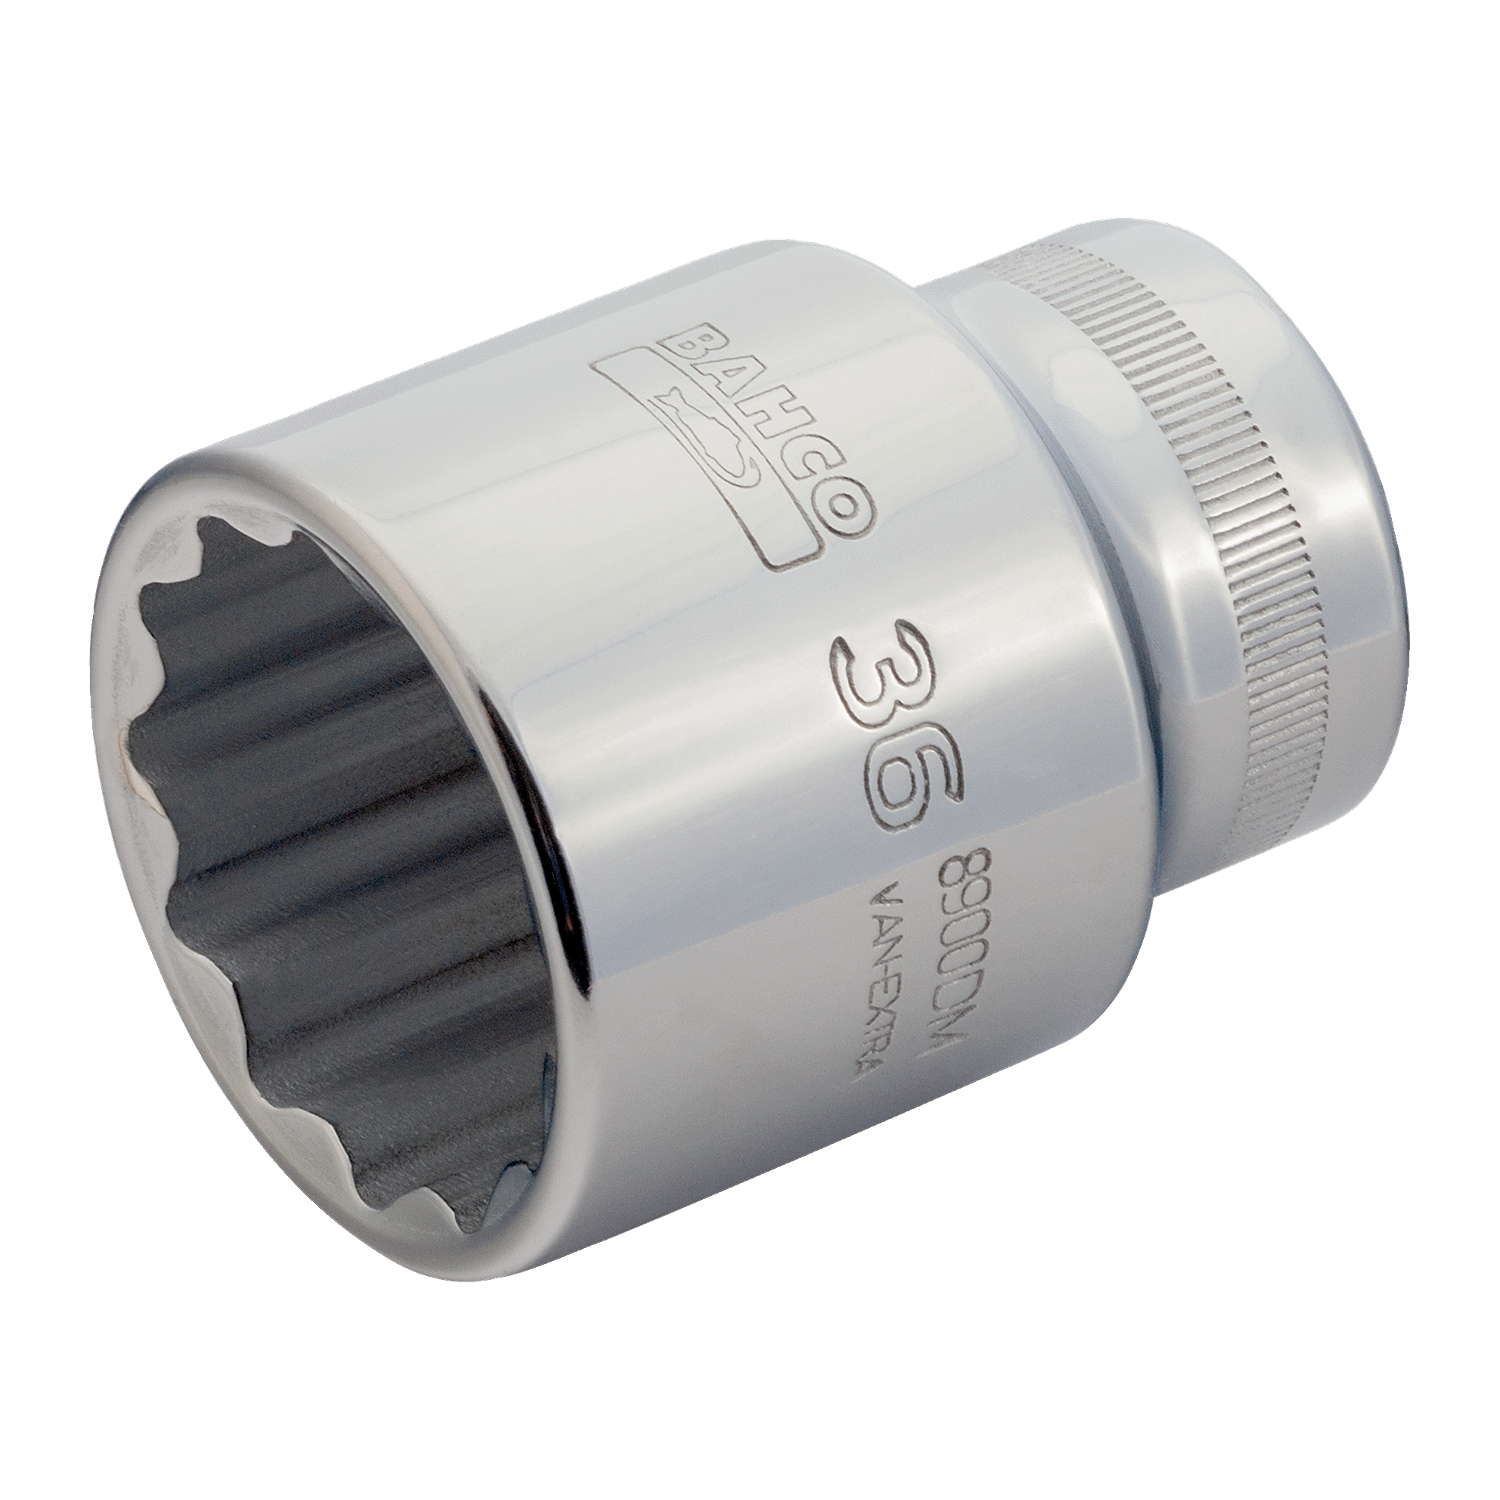 BAHCO 8900DM 3/4" Square Drive Socket With Metric Bi-Hex Profile - Premium Square Drive Socket from BAHCO - Shop now at Yew Aik.